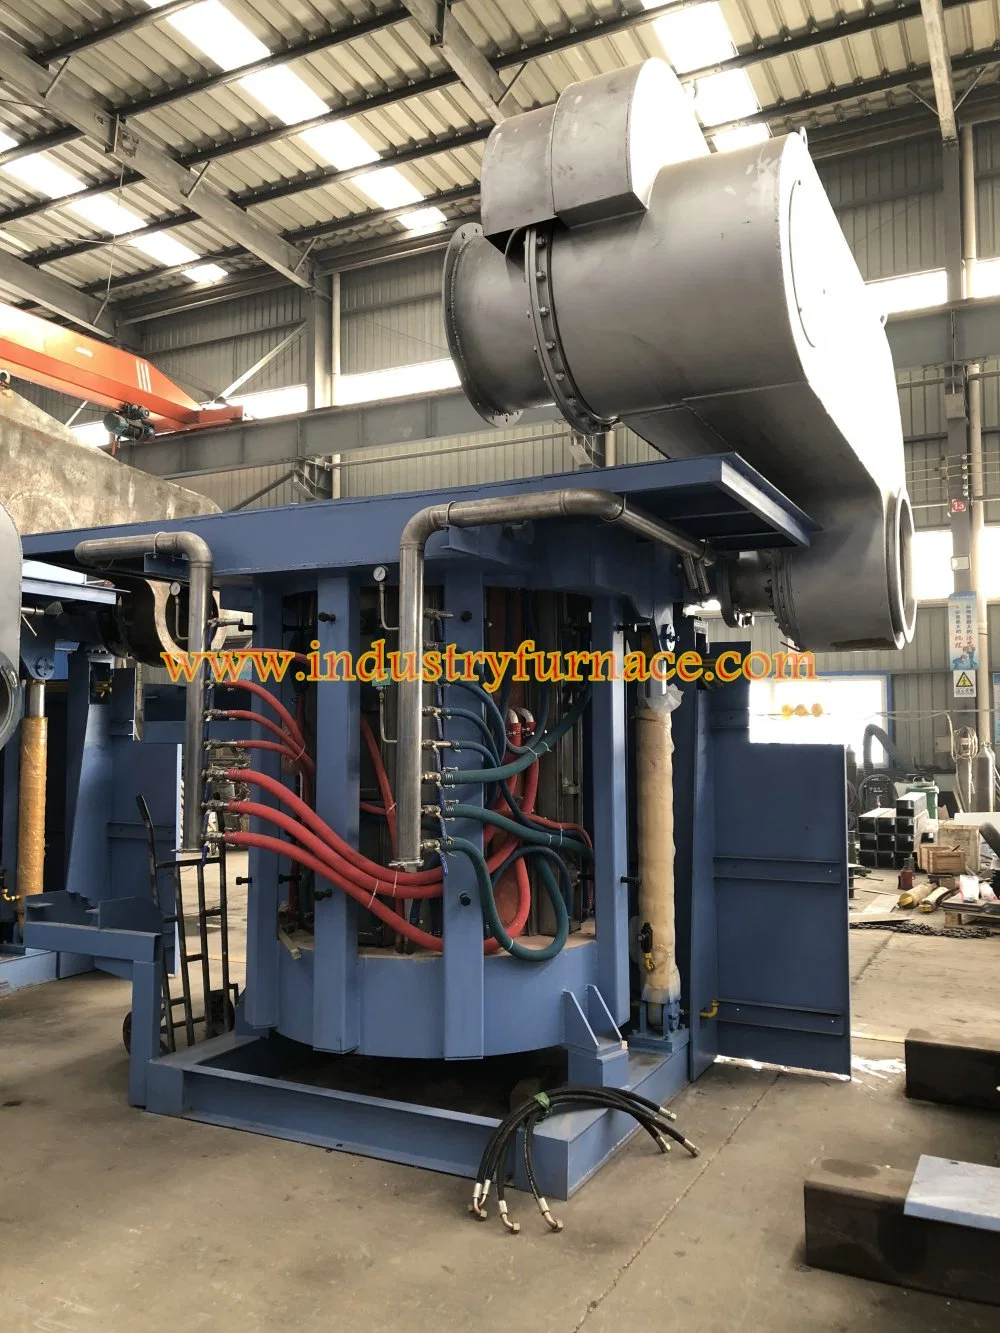 Coreless Medium Frequency Electric Induction Furnace for Steel/Iron/Stainless Steel/Copper/Aluminum Alloy Melting